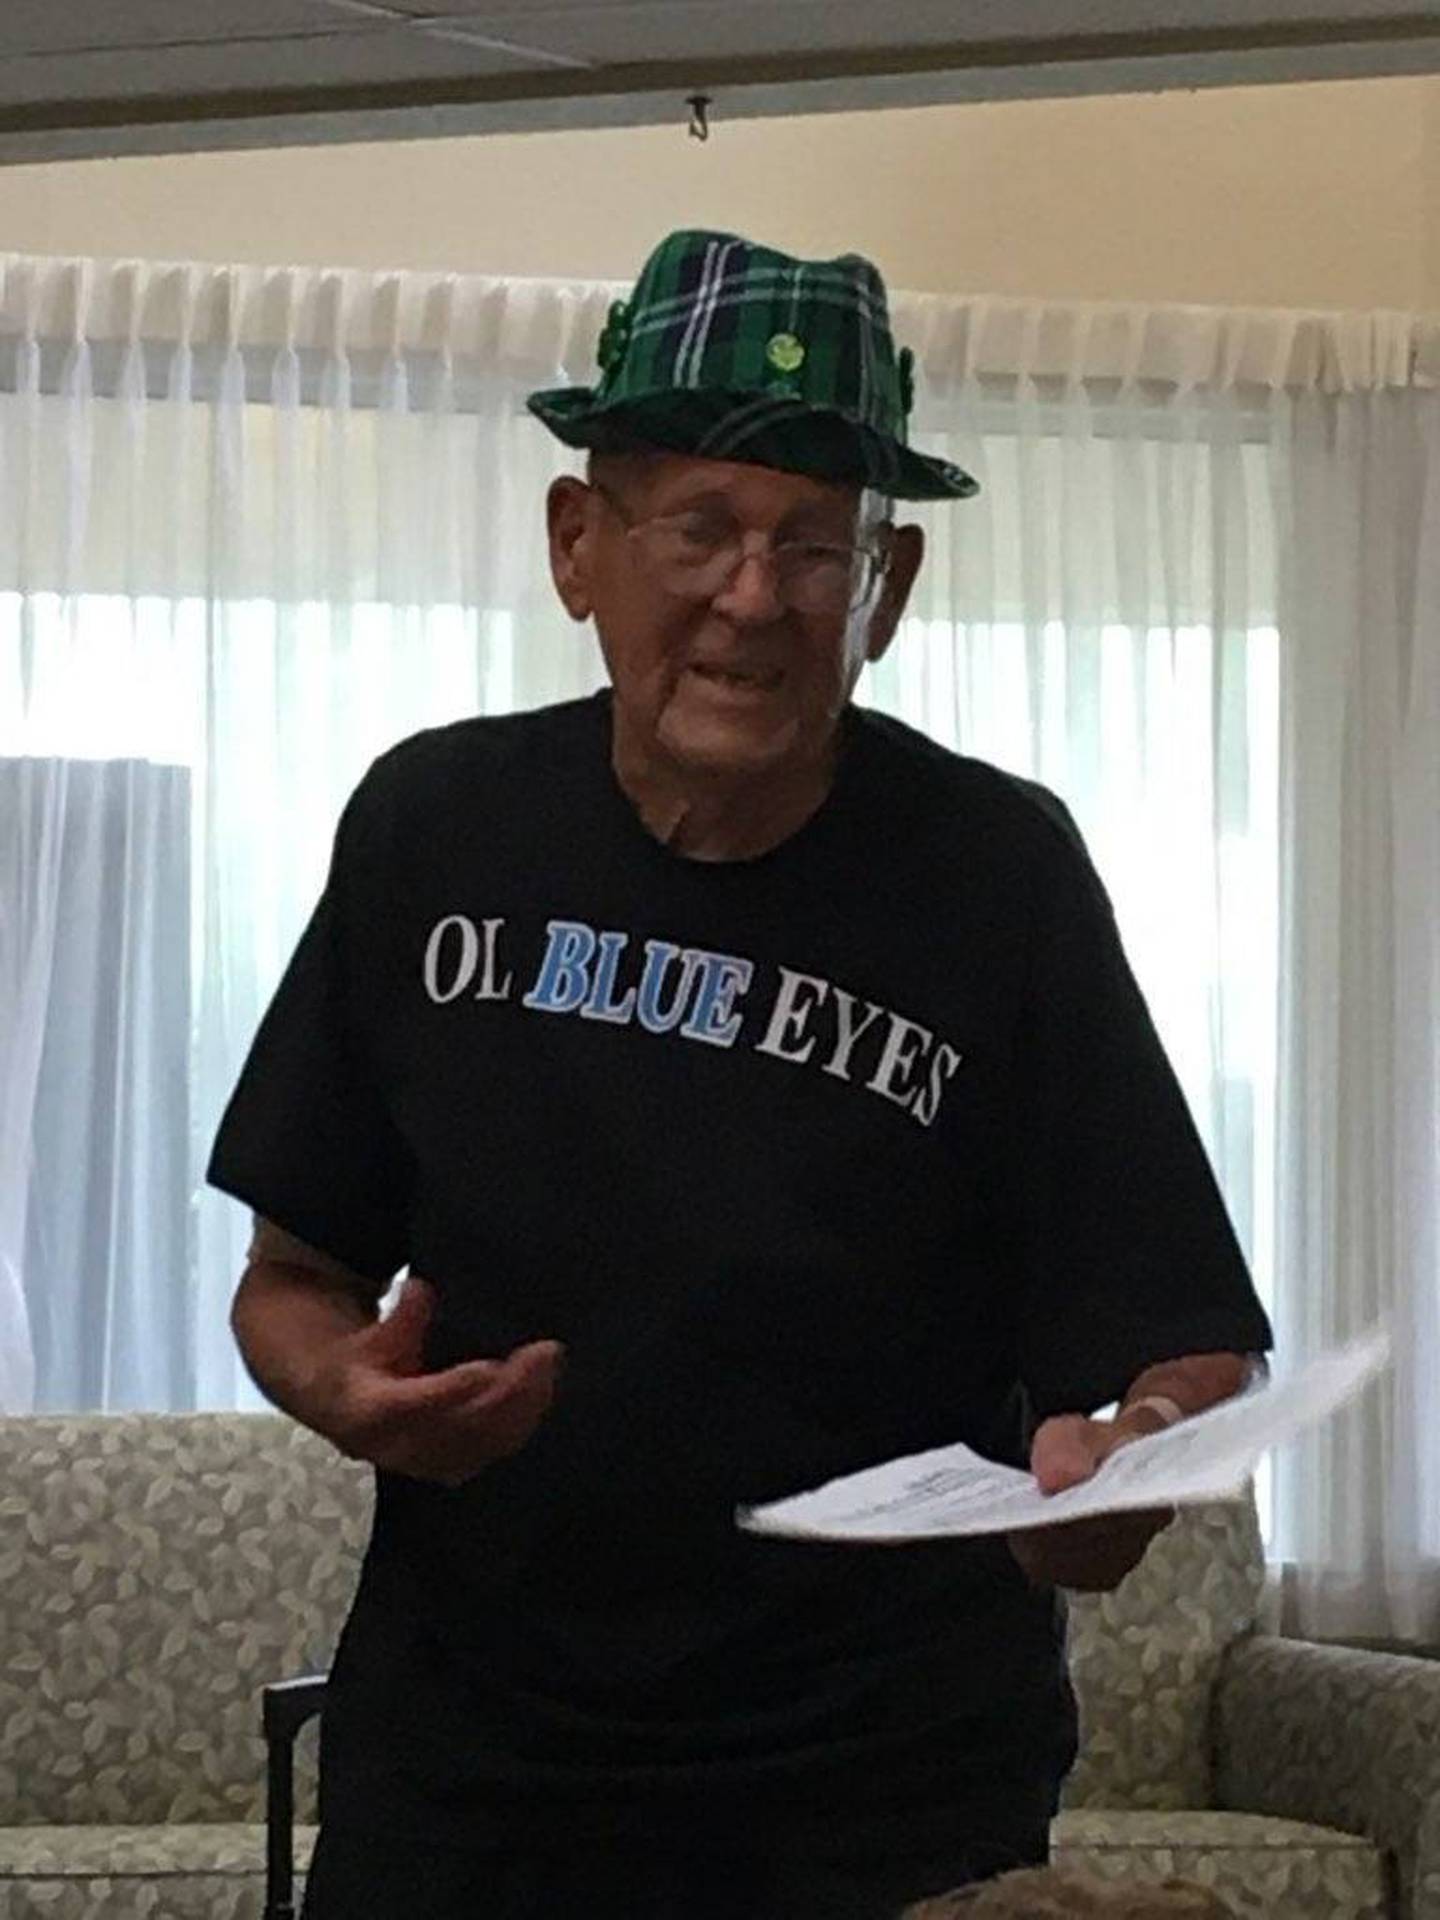 Glenn Masek of Joliet was happiest when he was entertaining his fellow residents, and bringing smiles to their faces.  He even created a stand-up act, telling jokes and singing songs.  His favorite song was “My Way,” made famous by Frank Sinatra.